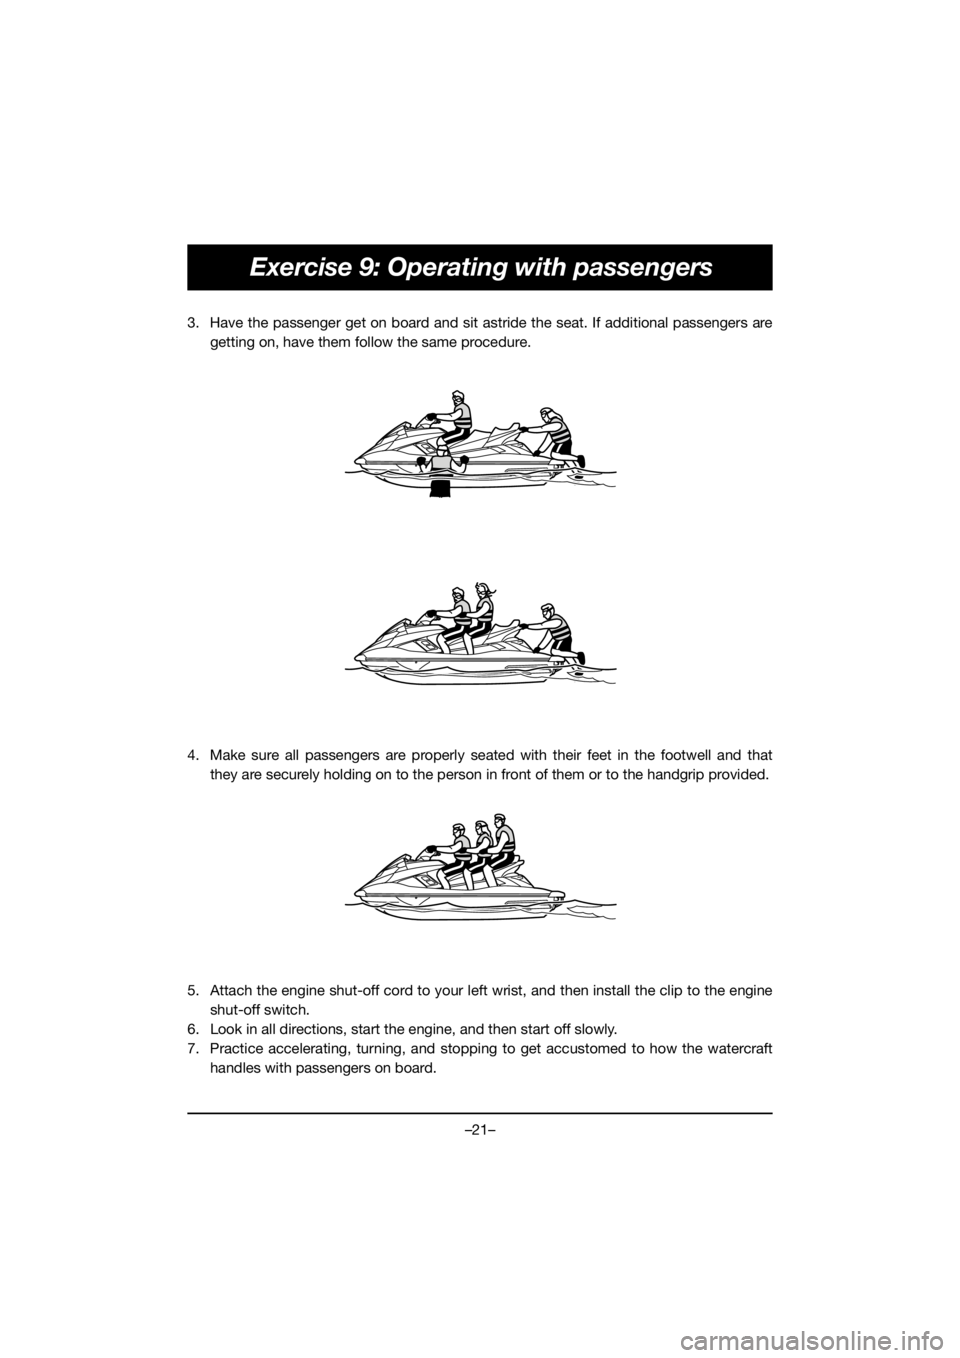 YAMAHA FX HO 2019  Manuale duso (in Italian) –21–
Exercise 9: Operating with passengers
3. Have the passenger get on board and sit astride the seat. If additional passengers are
getting on, have them follow the same procedure.
4. Make sure a